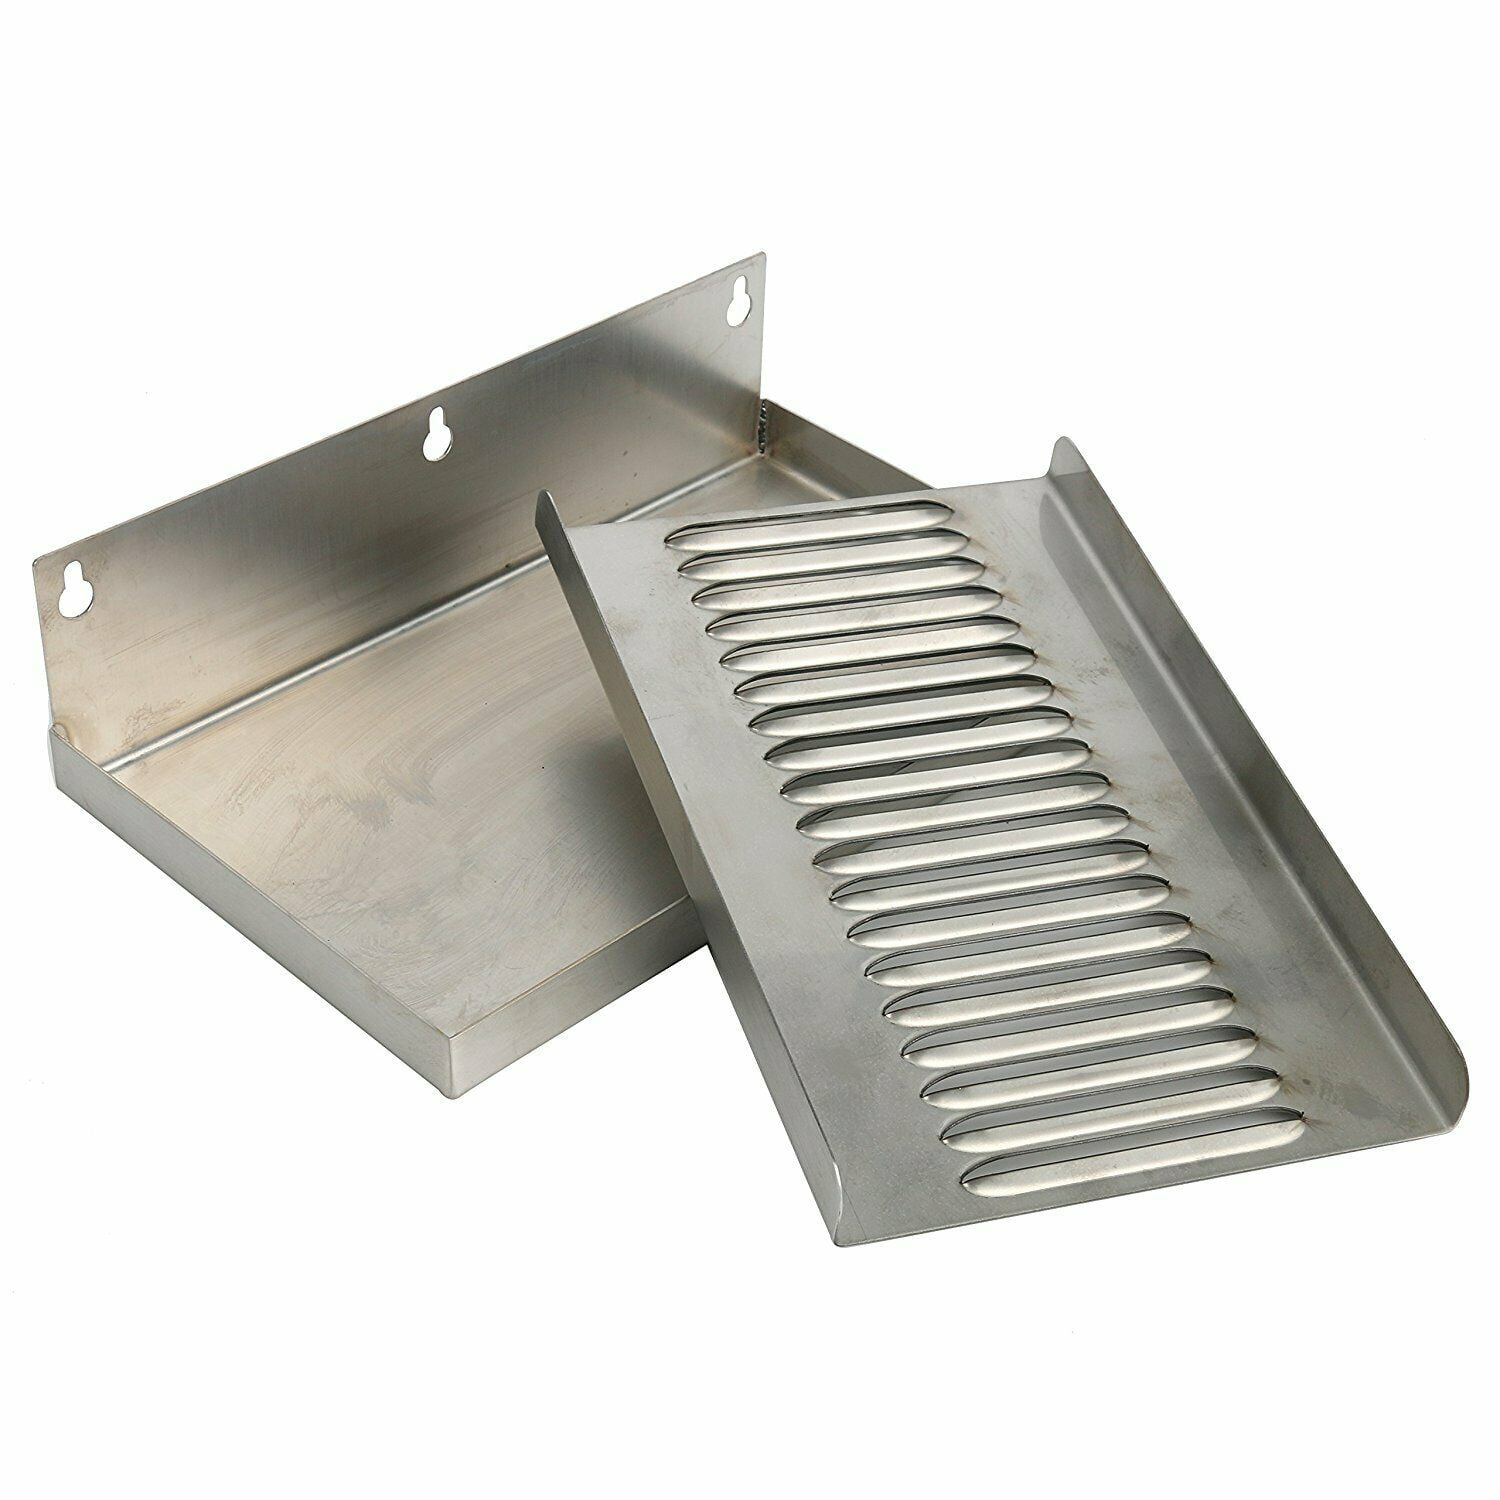 Stainless Steel 10"x 6" Wall Mounted Drip Tray No Drain Draft Beer Drip Tray 